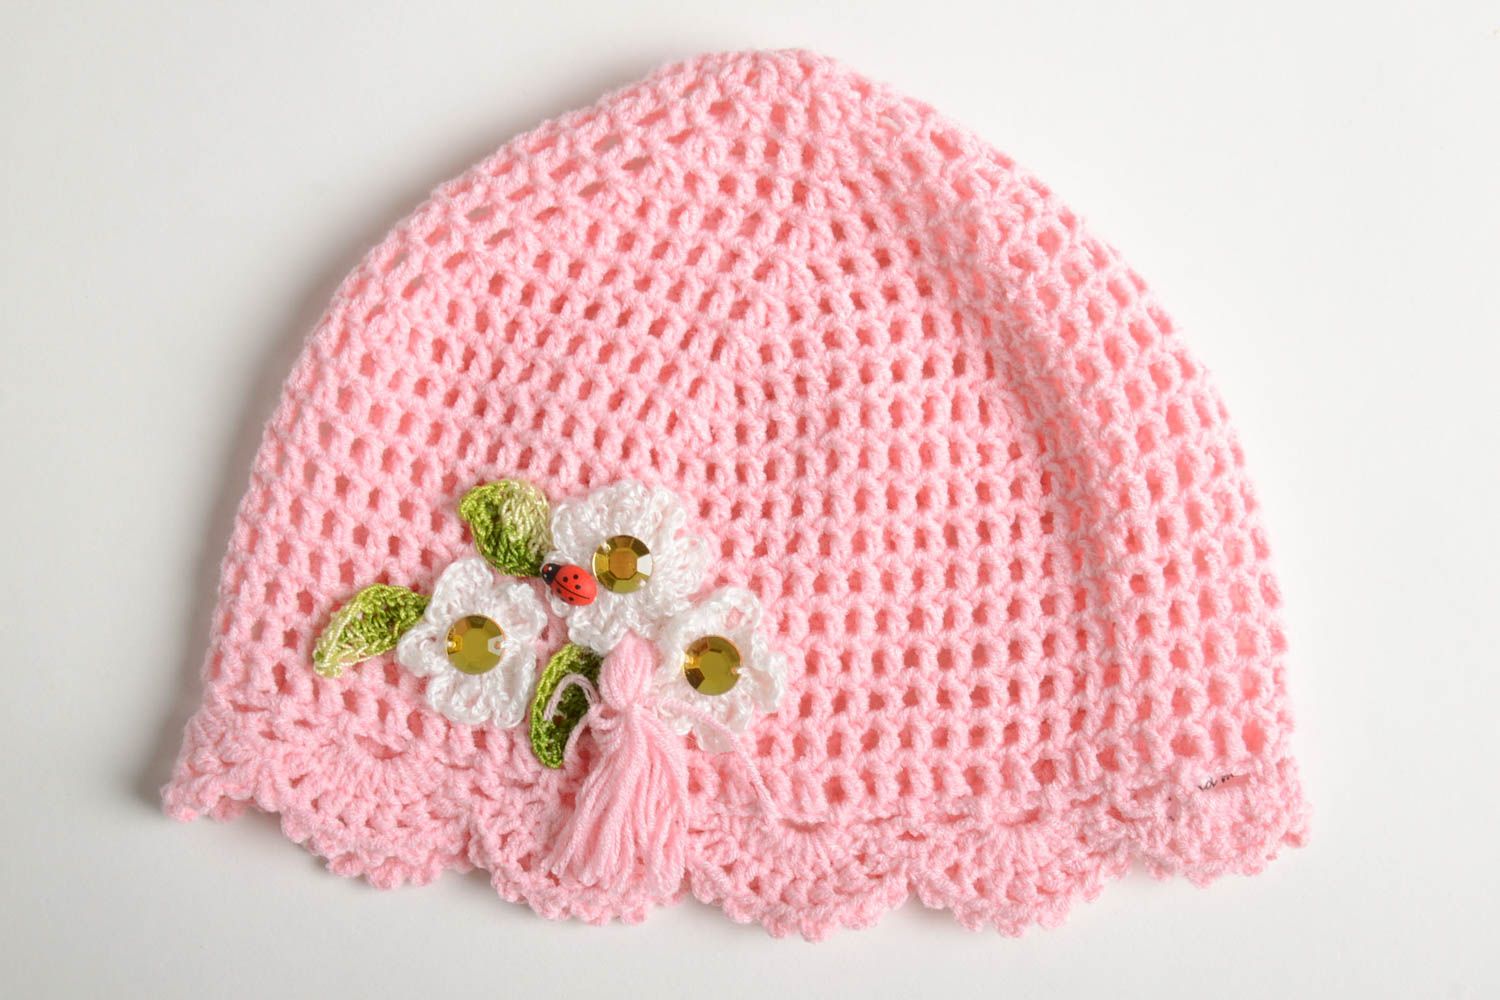 Handmade cute baby hats crochet baby hat funny hats kids clothing gifts for girl photo 2